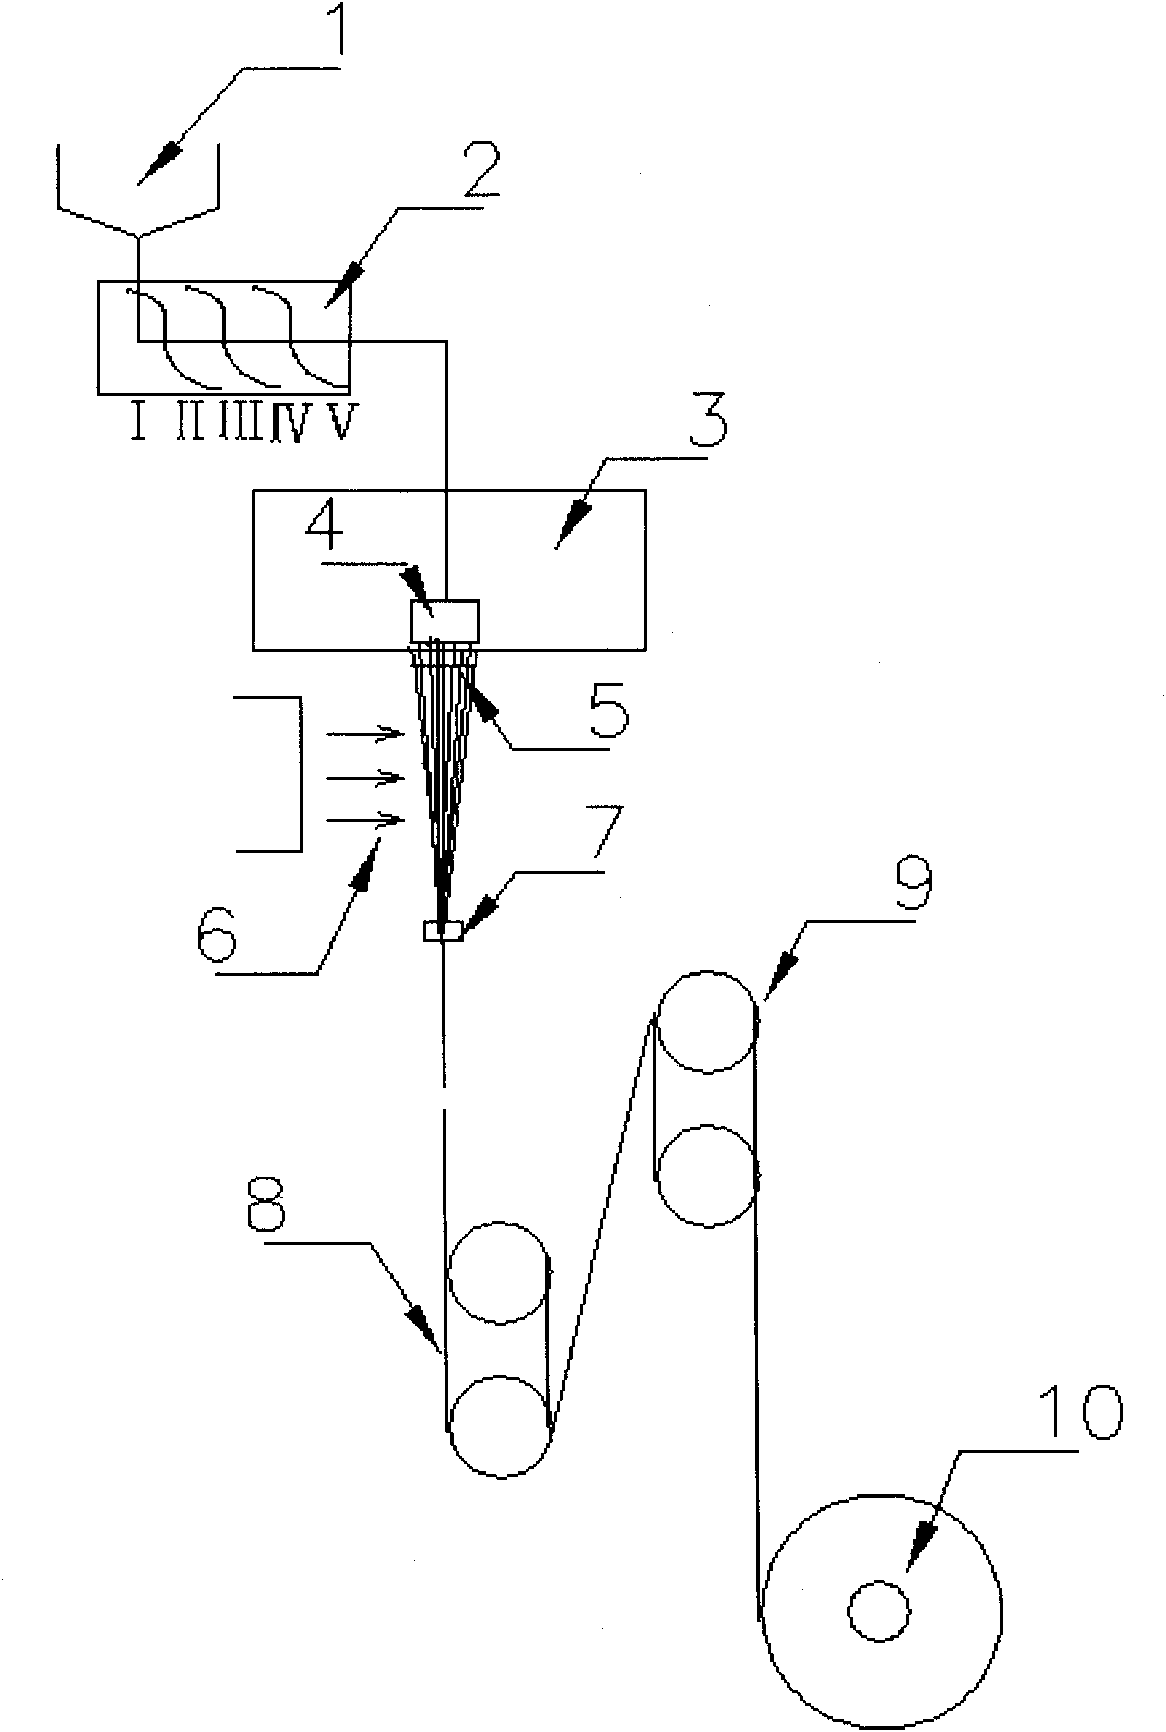 Method for preparing biodegradable copolyester fully-drawn yarns in one step